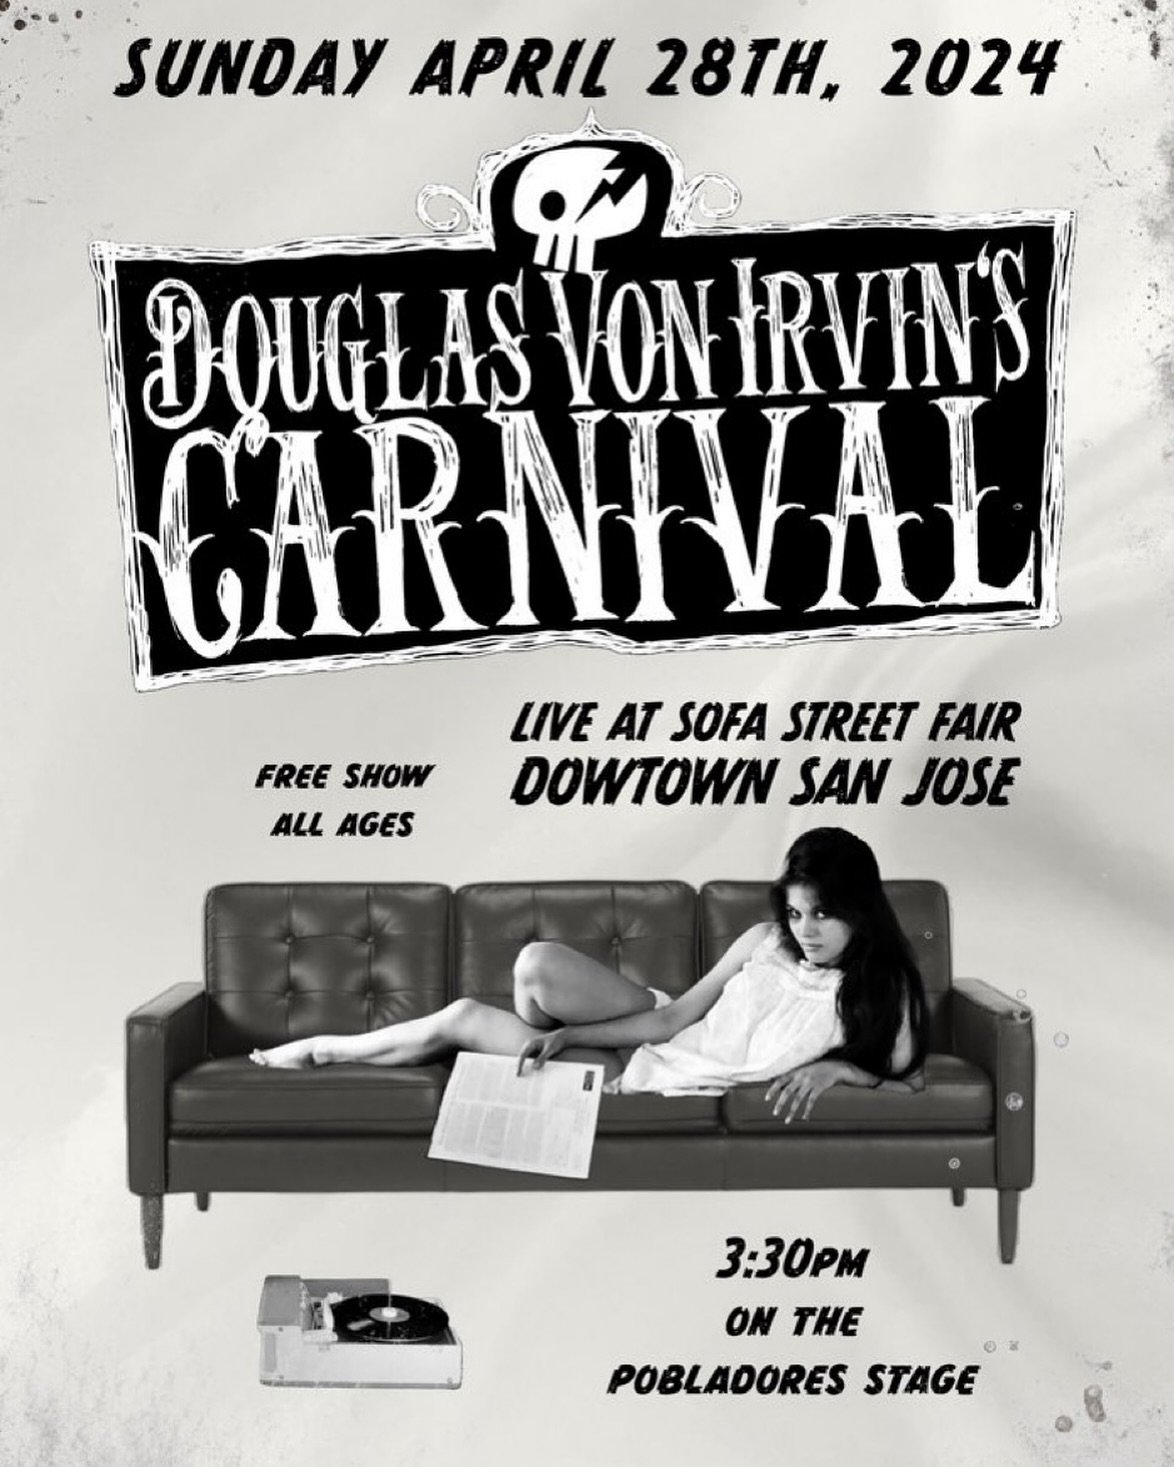 Sunday☠️

April 28th 3:30pm at Pobladores Stage:
Douglas Von Irvin&rsquo;s Carnival returns to The Sofa Street Fair!

Members of Average Jill performing with DVIC
Surf Monster = 2:30p

#sanjosescene #rockmusic #ramones #surfguitar #livemusic @sofastr